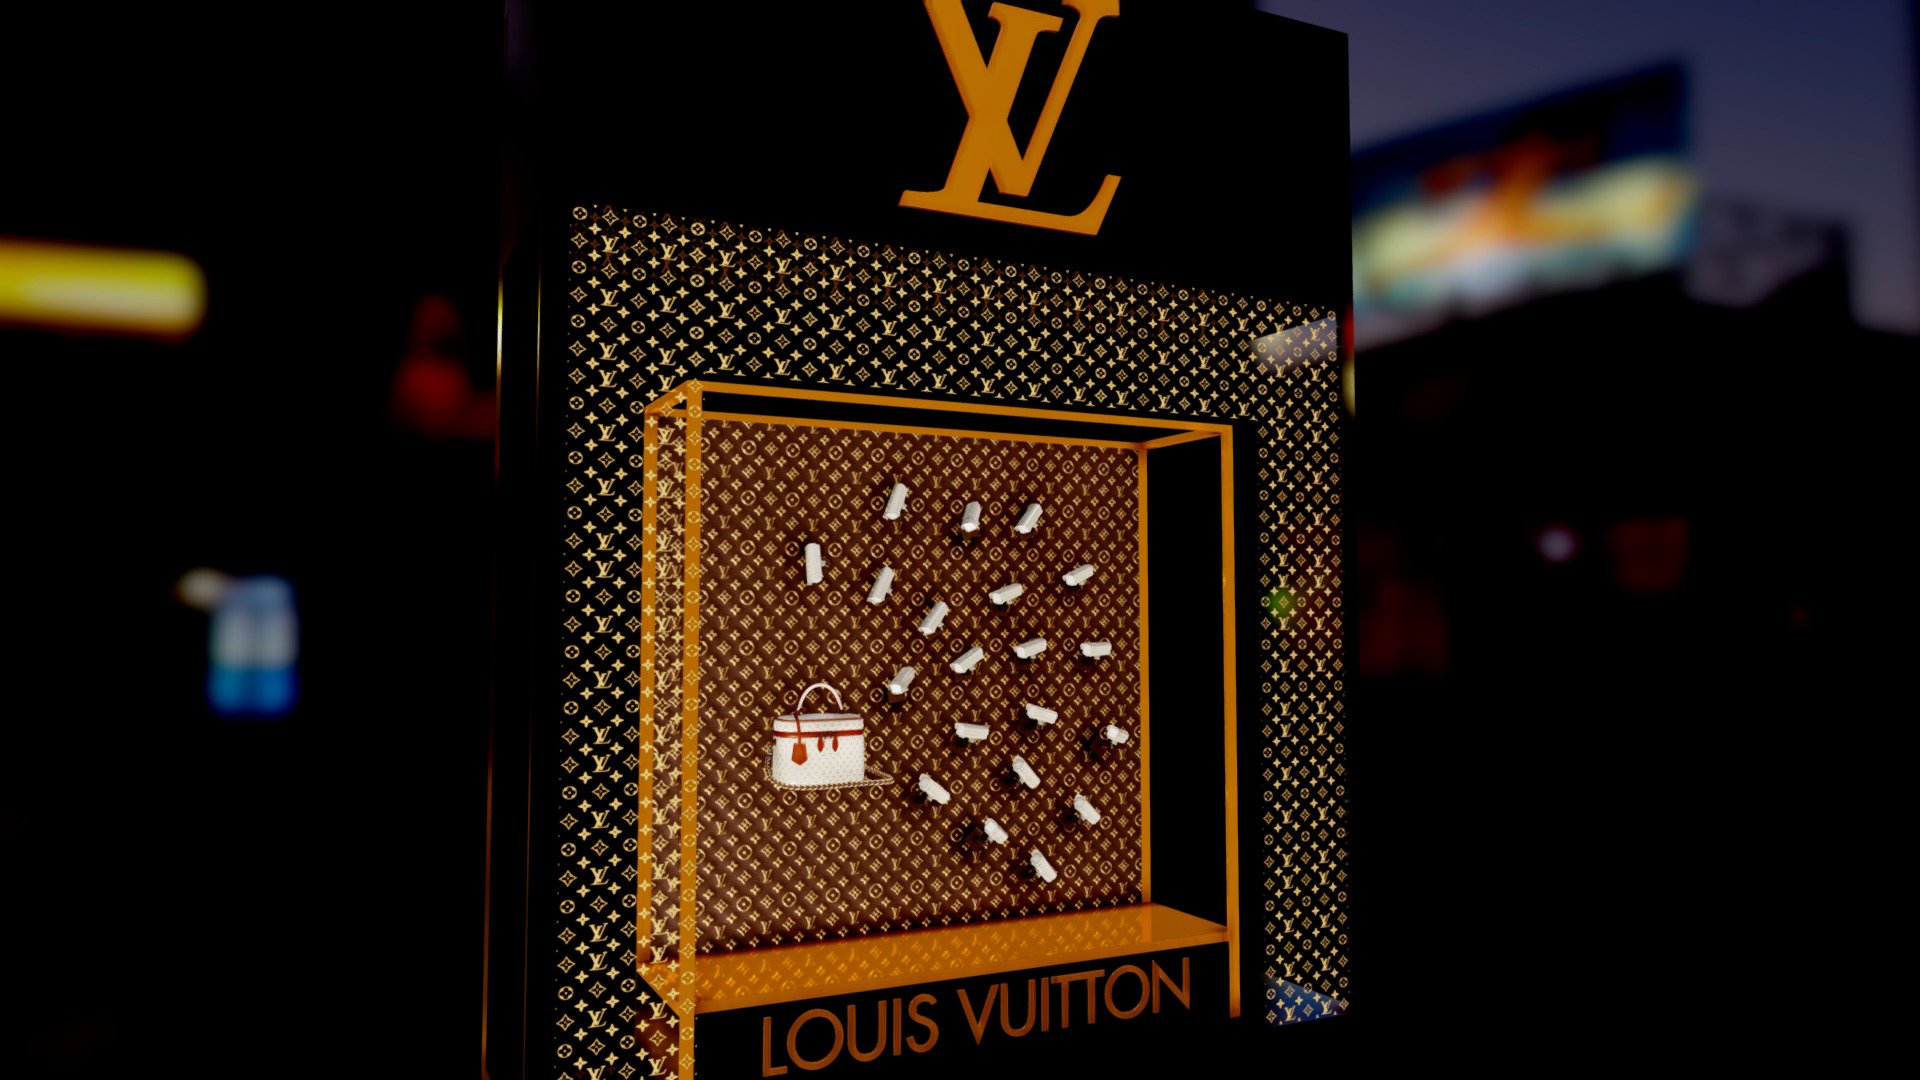 Louis Vuitton window display (escaparate)

model:
Security Camera (with Animations &amp; Textures): by TampaJoey
https://sketchfab.com/3d-models/security-camera-with-animations-textures-631834aba23f43a482e4de7120d68d19

Based in https://www.pinterest.es/pin/270075308877597627/

https://es.louisvuitton.com - Louis Vuitton window display (animated) - Download Free 3D model by vmmaniac 3d model